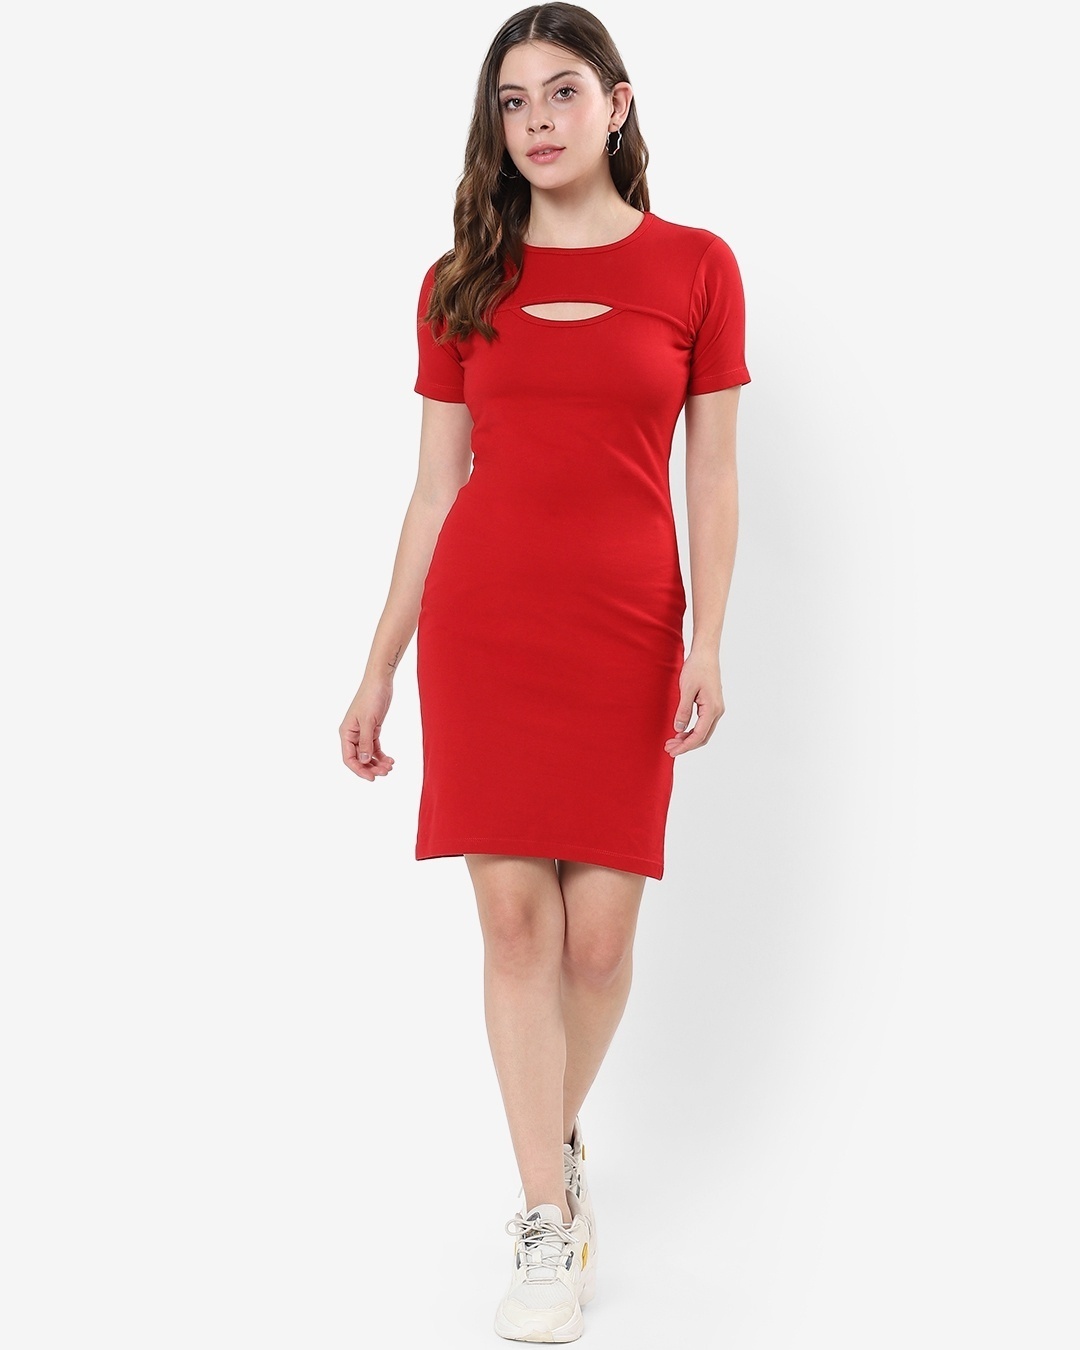 Shop Women's Savvy Red Cut Out Dress-Full